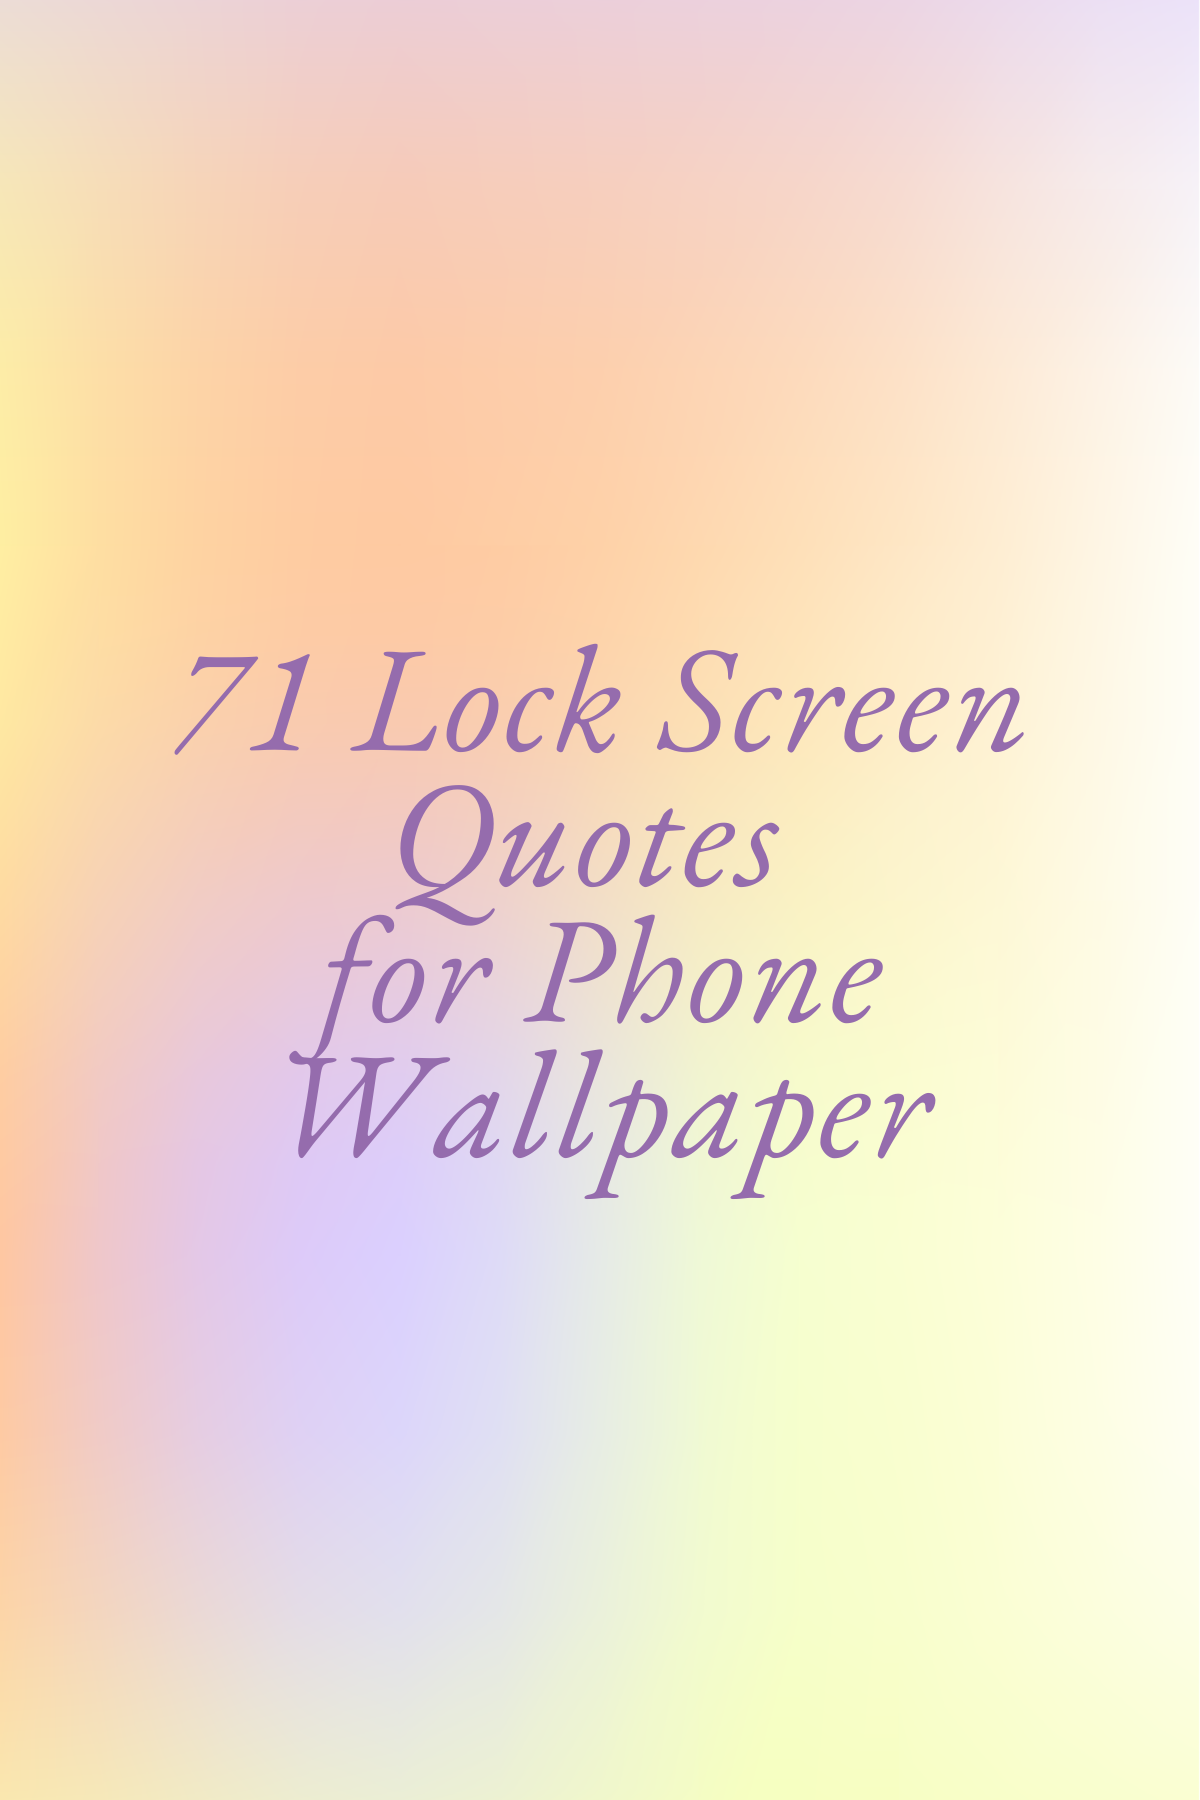 Lock screen quotes for phone wallpaper